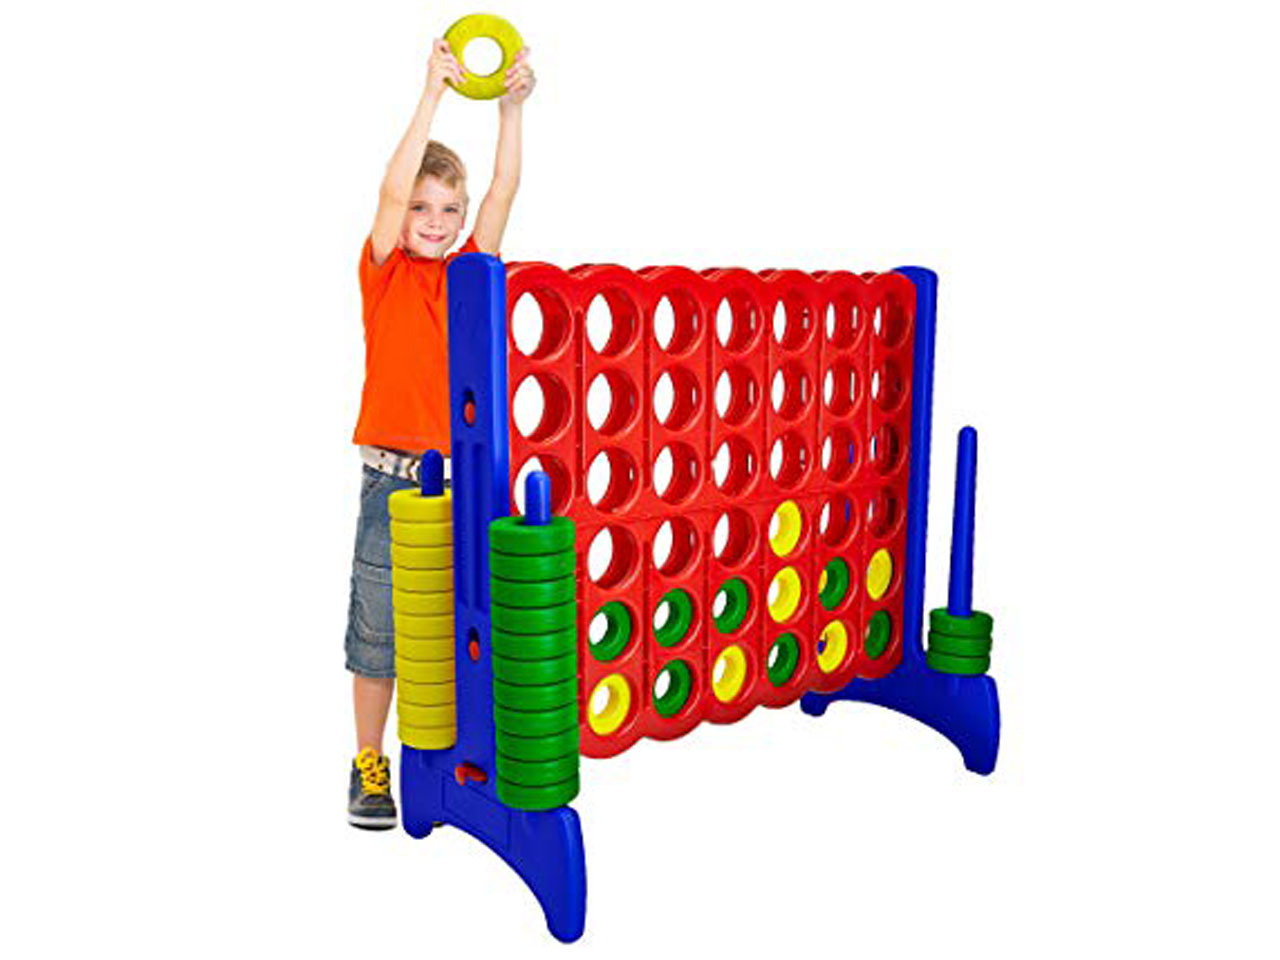 connect4 image 2